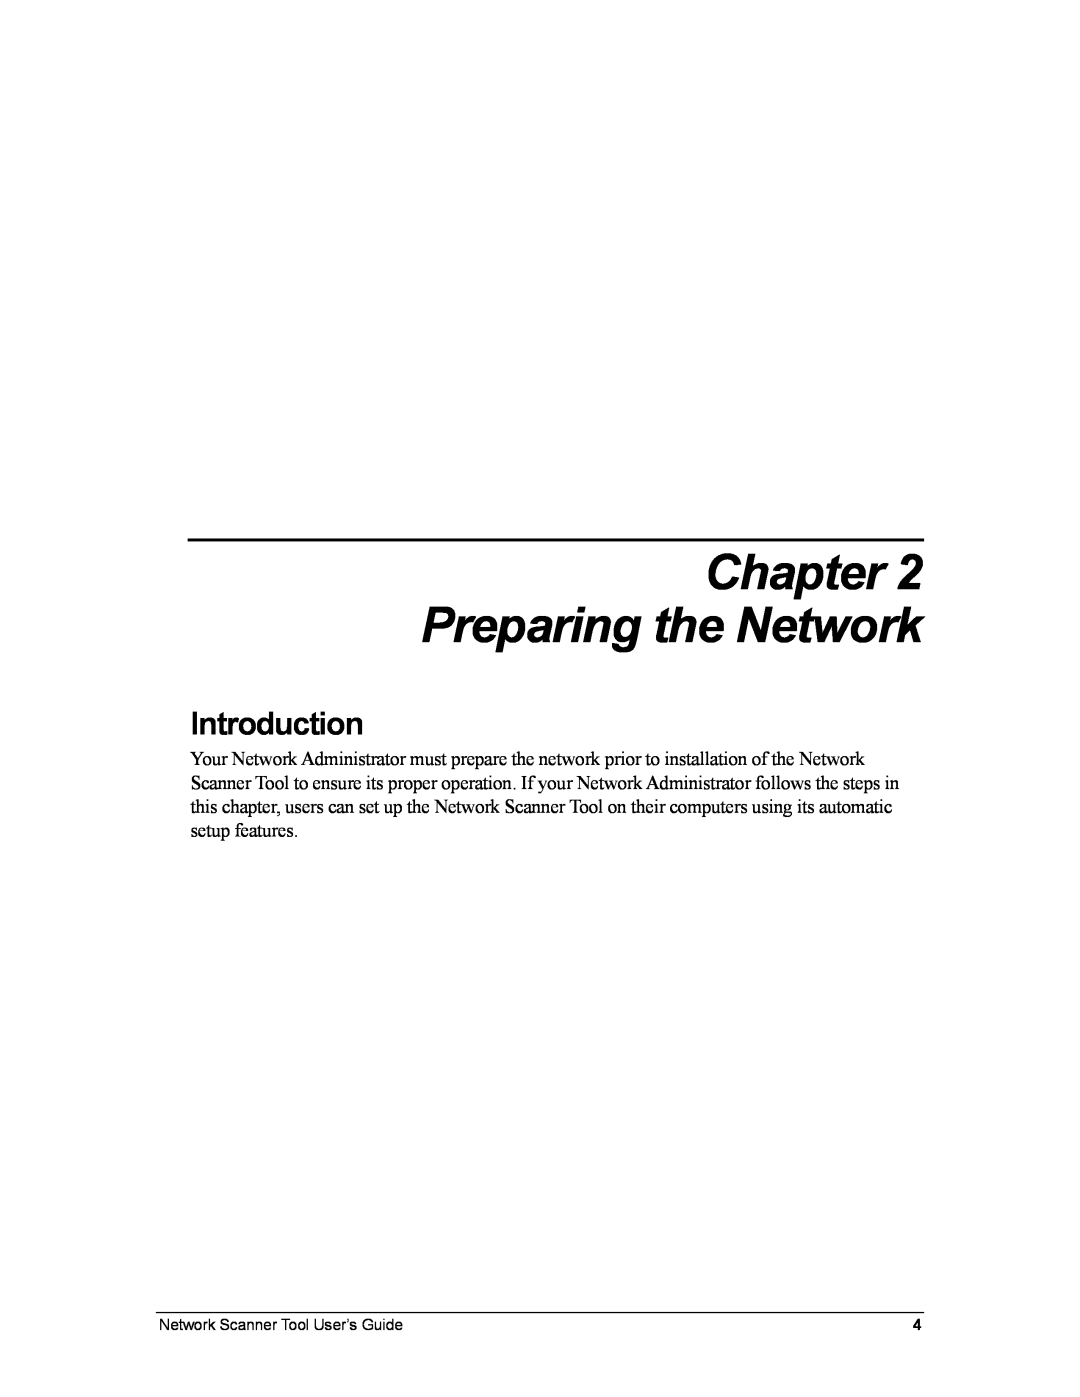 Sharp R3.1 manual Chapter Preparing the Network, Introduction, Network Scanner Tool User’s Guide 